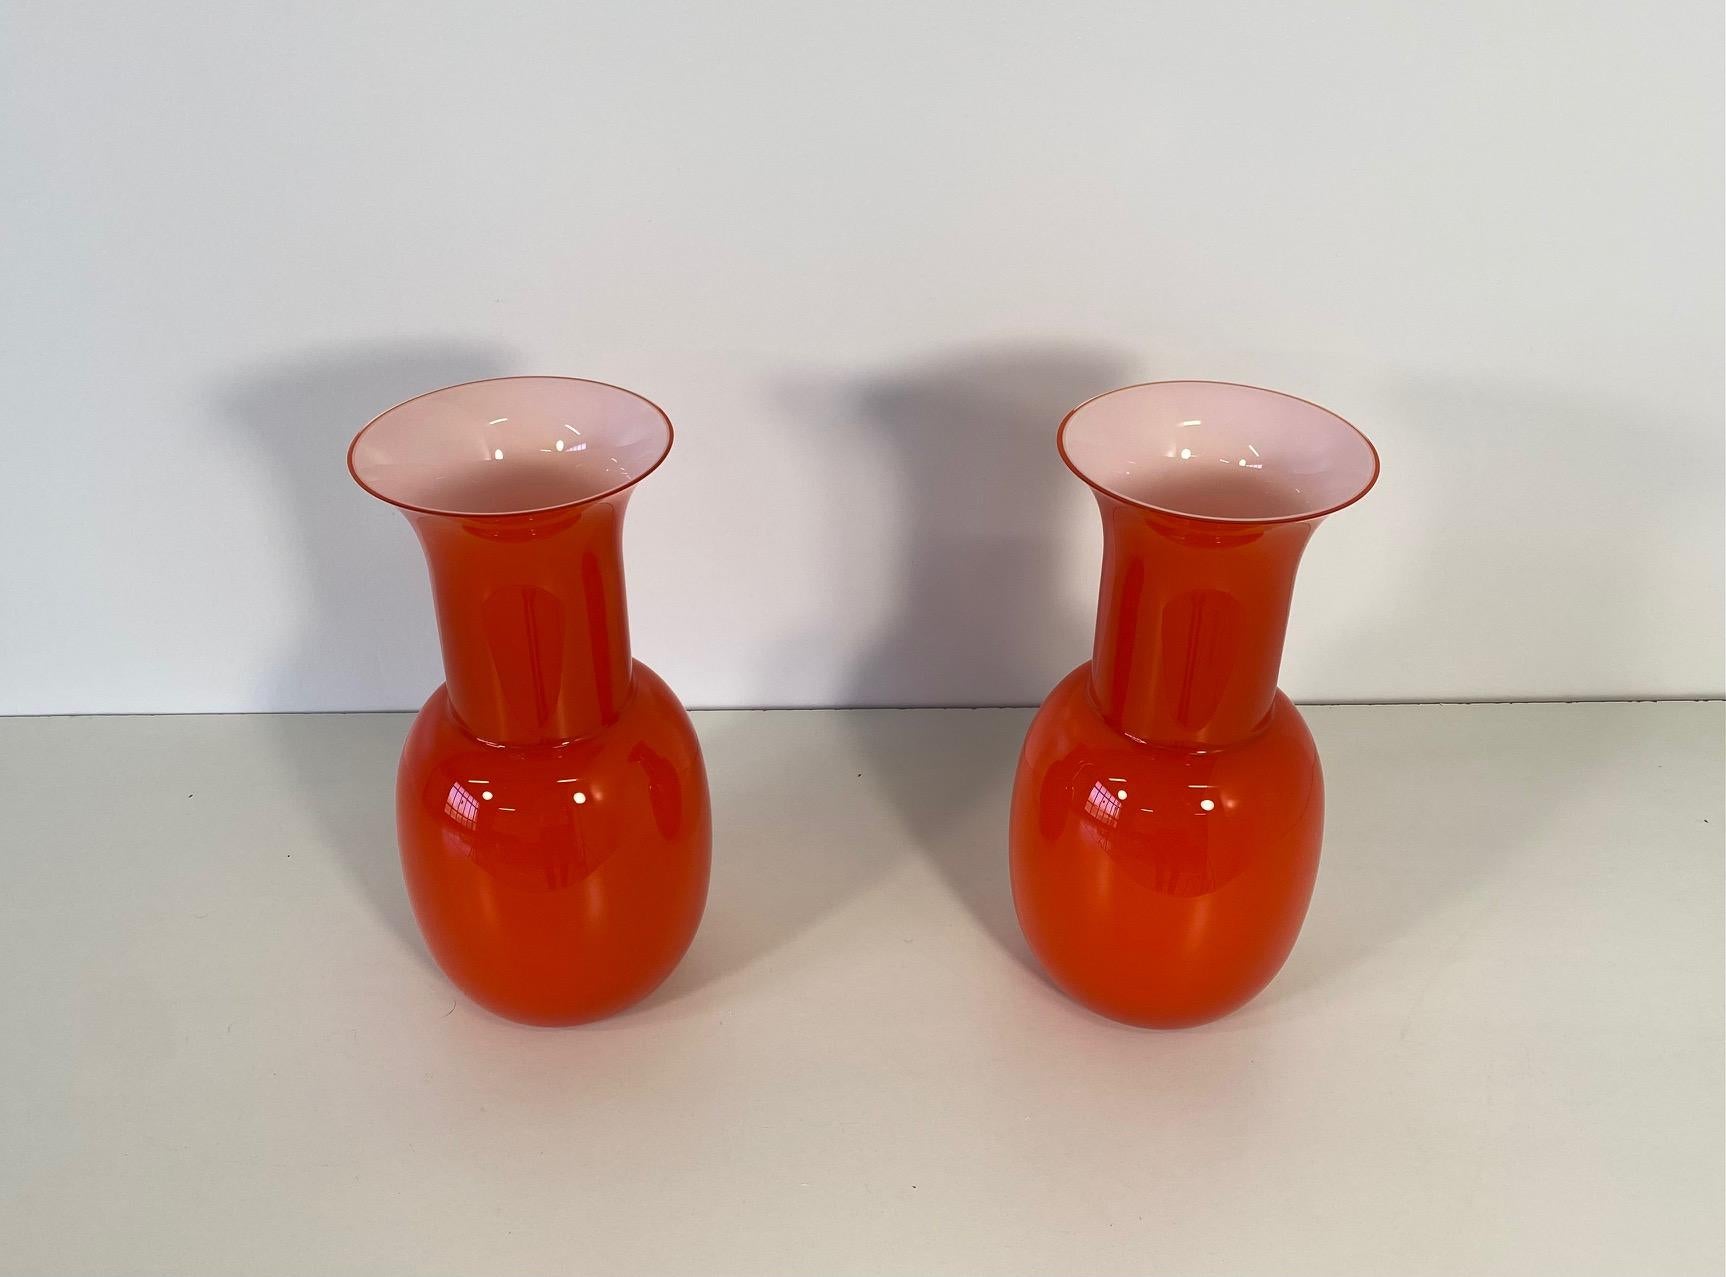 This pair of vases was produced in Italy, more precisely in Murano, which is the world's capital of glass art making and crafting. 
They are completely made of an unique piece of Murano glass, worked with a particular technique so that the inside